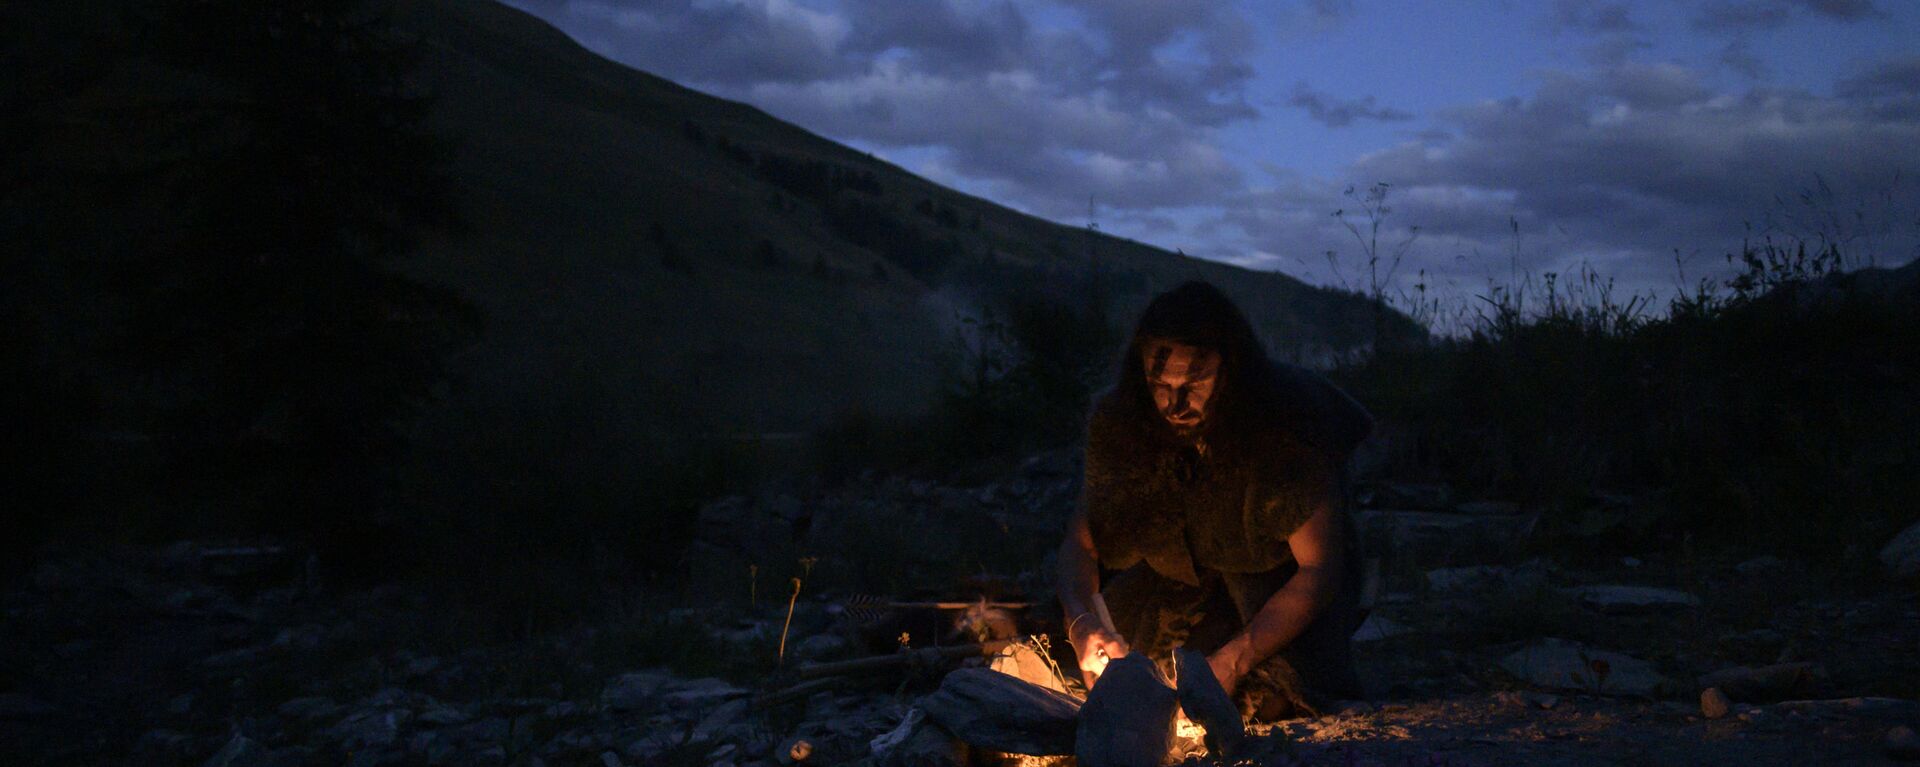 Guido Camia dressed as a Neanderthal Cave man lights a campfire in Chianale, in the Italian Alps, near the French border, on August 7, 2019. - Sputnik International, 1920, 09.05.2021